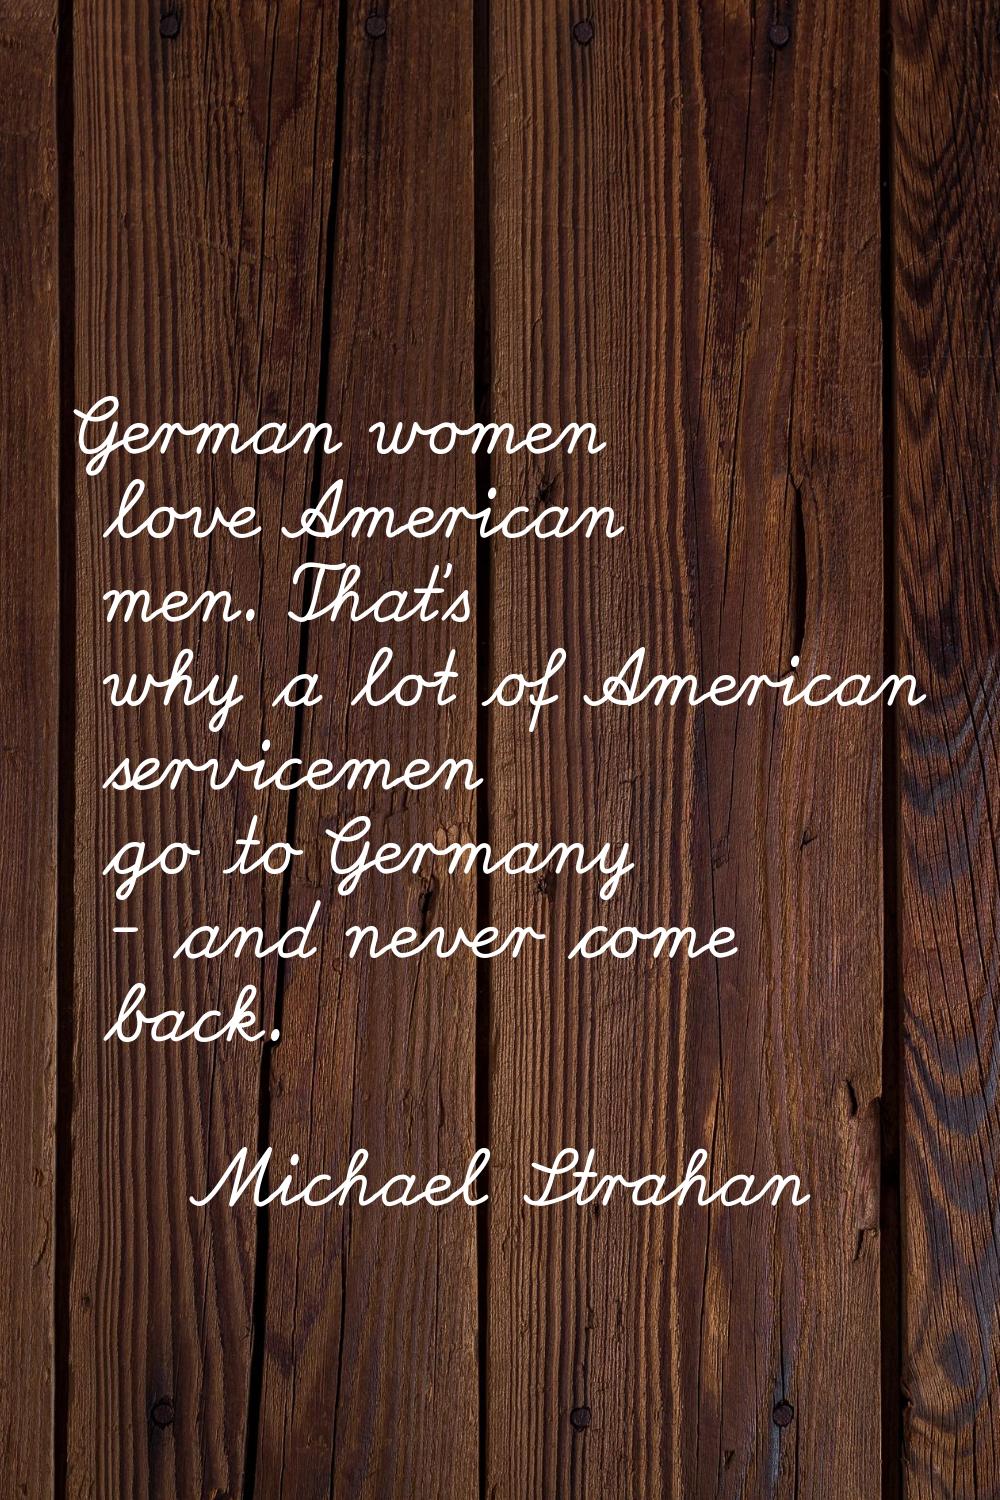 German women love American men. That's why a lot of American servicemen go to Germany - and never c